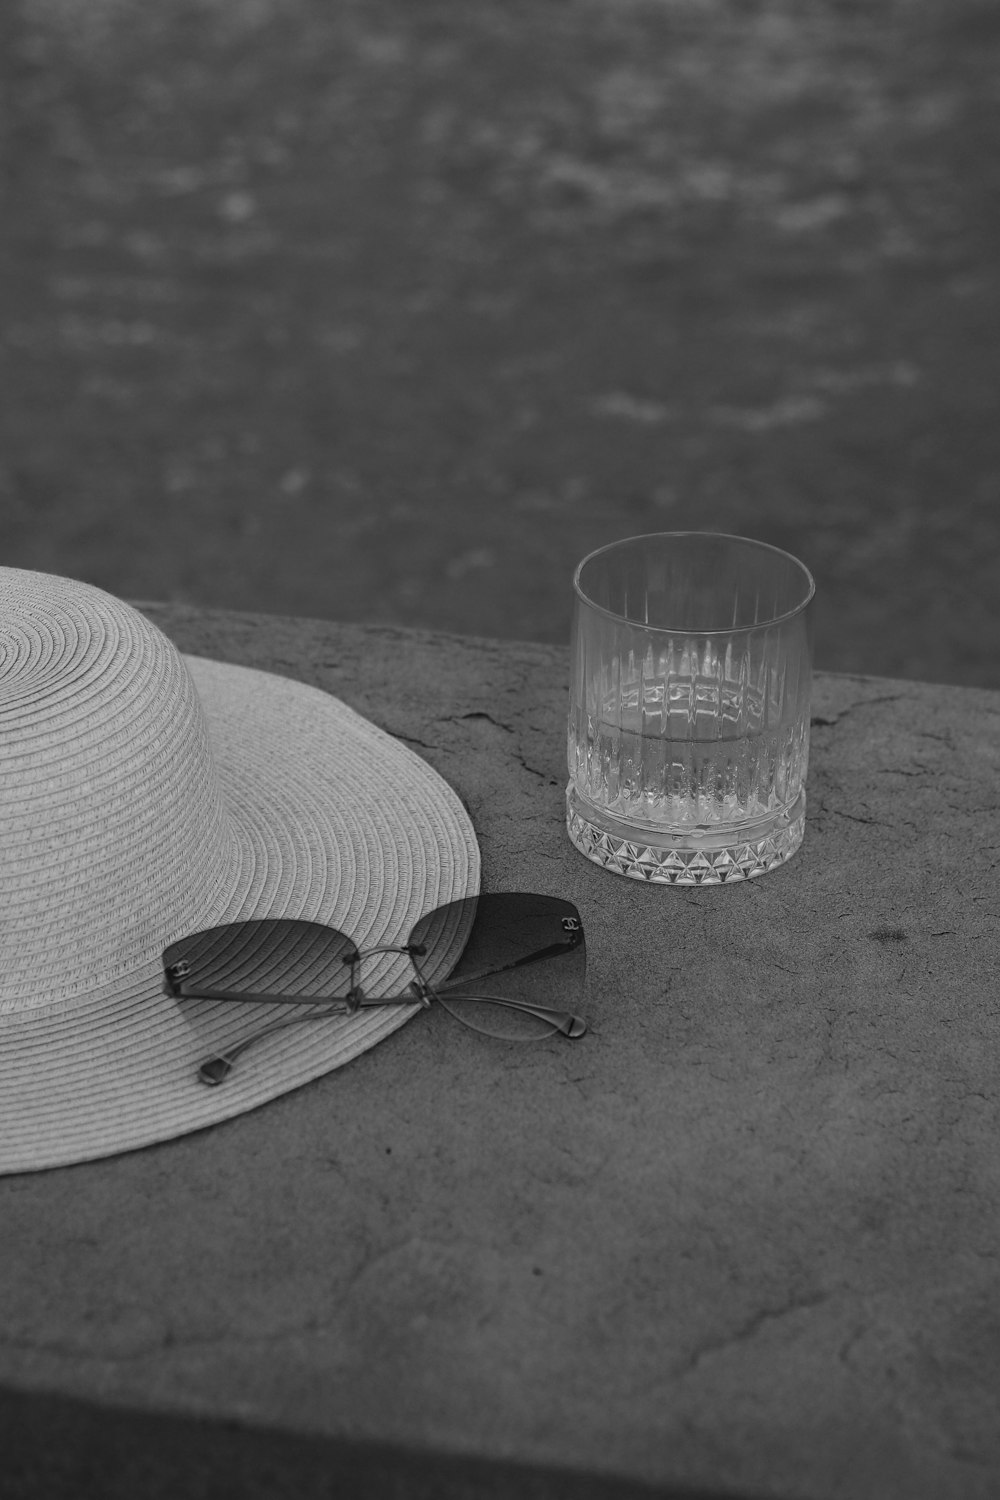 a hat, sunglasses and a glass sitting on a ledge